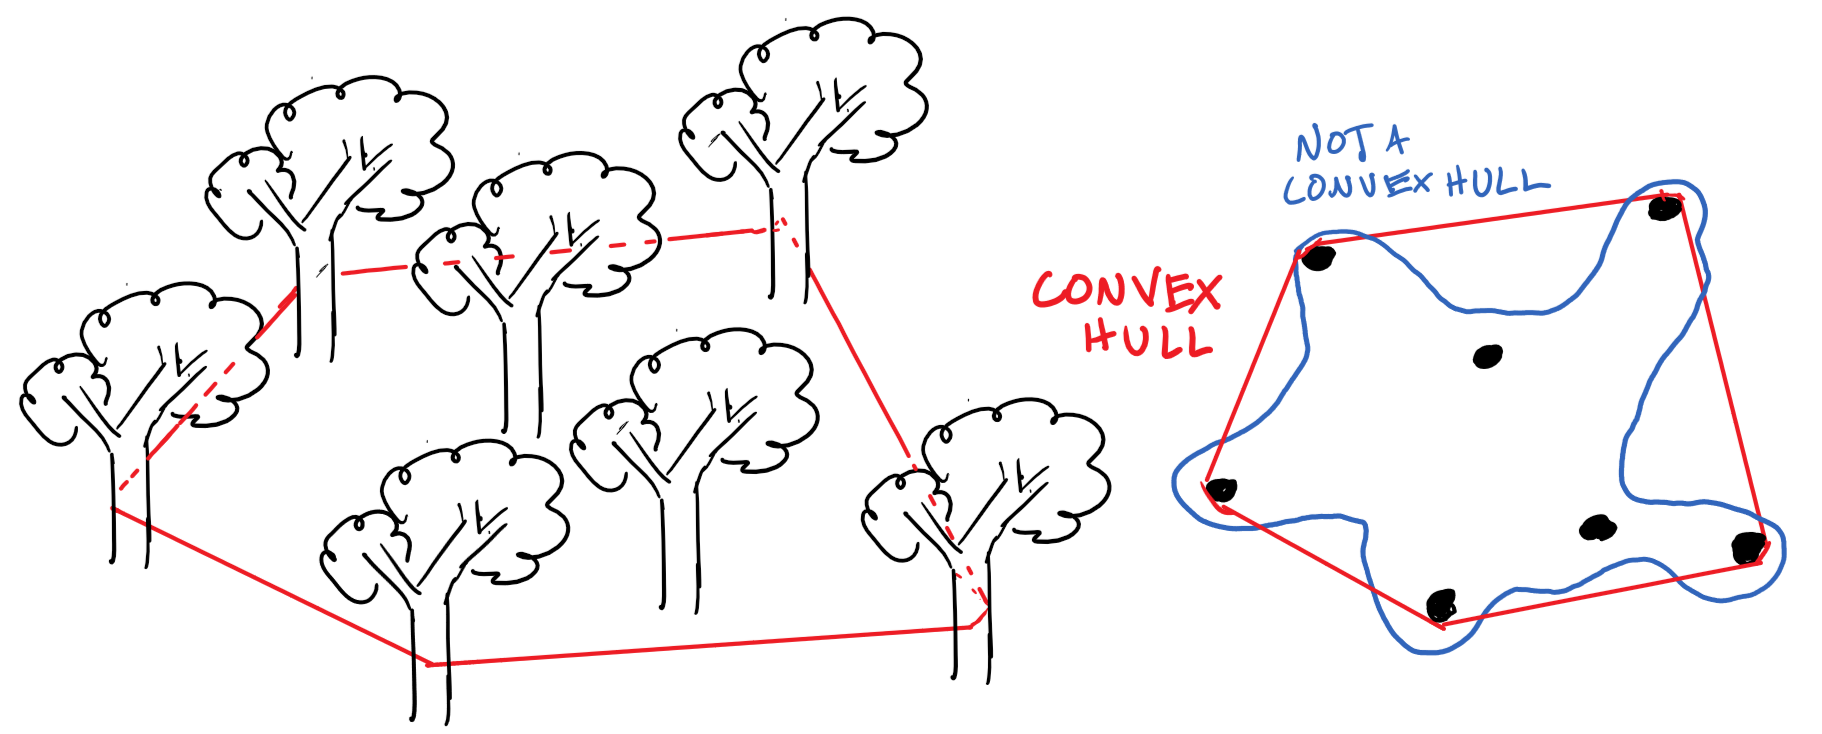 Convex hull as tape around a grove of trees